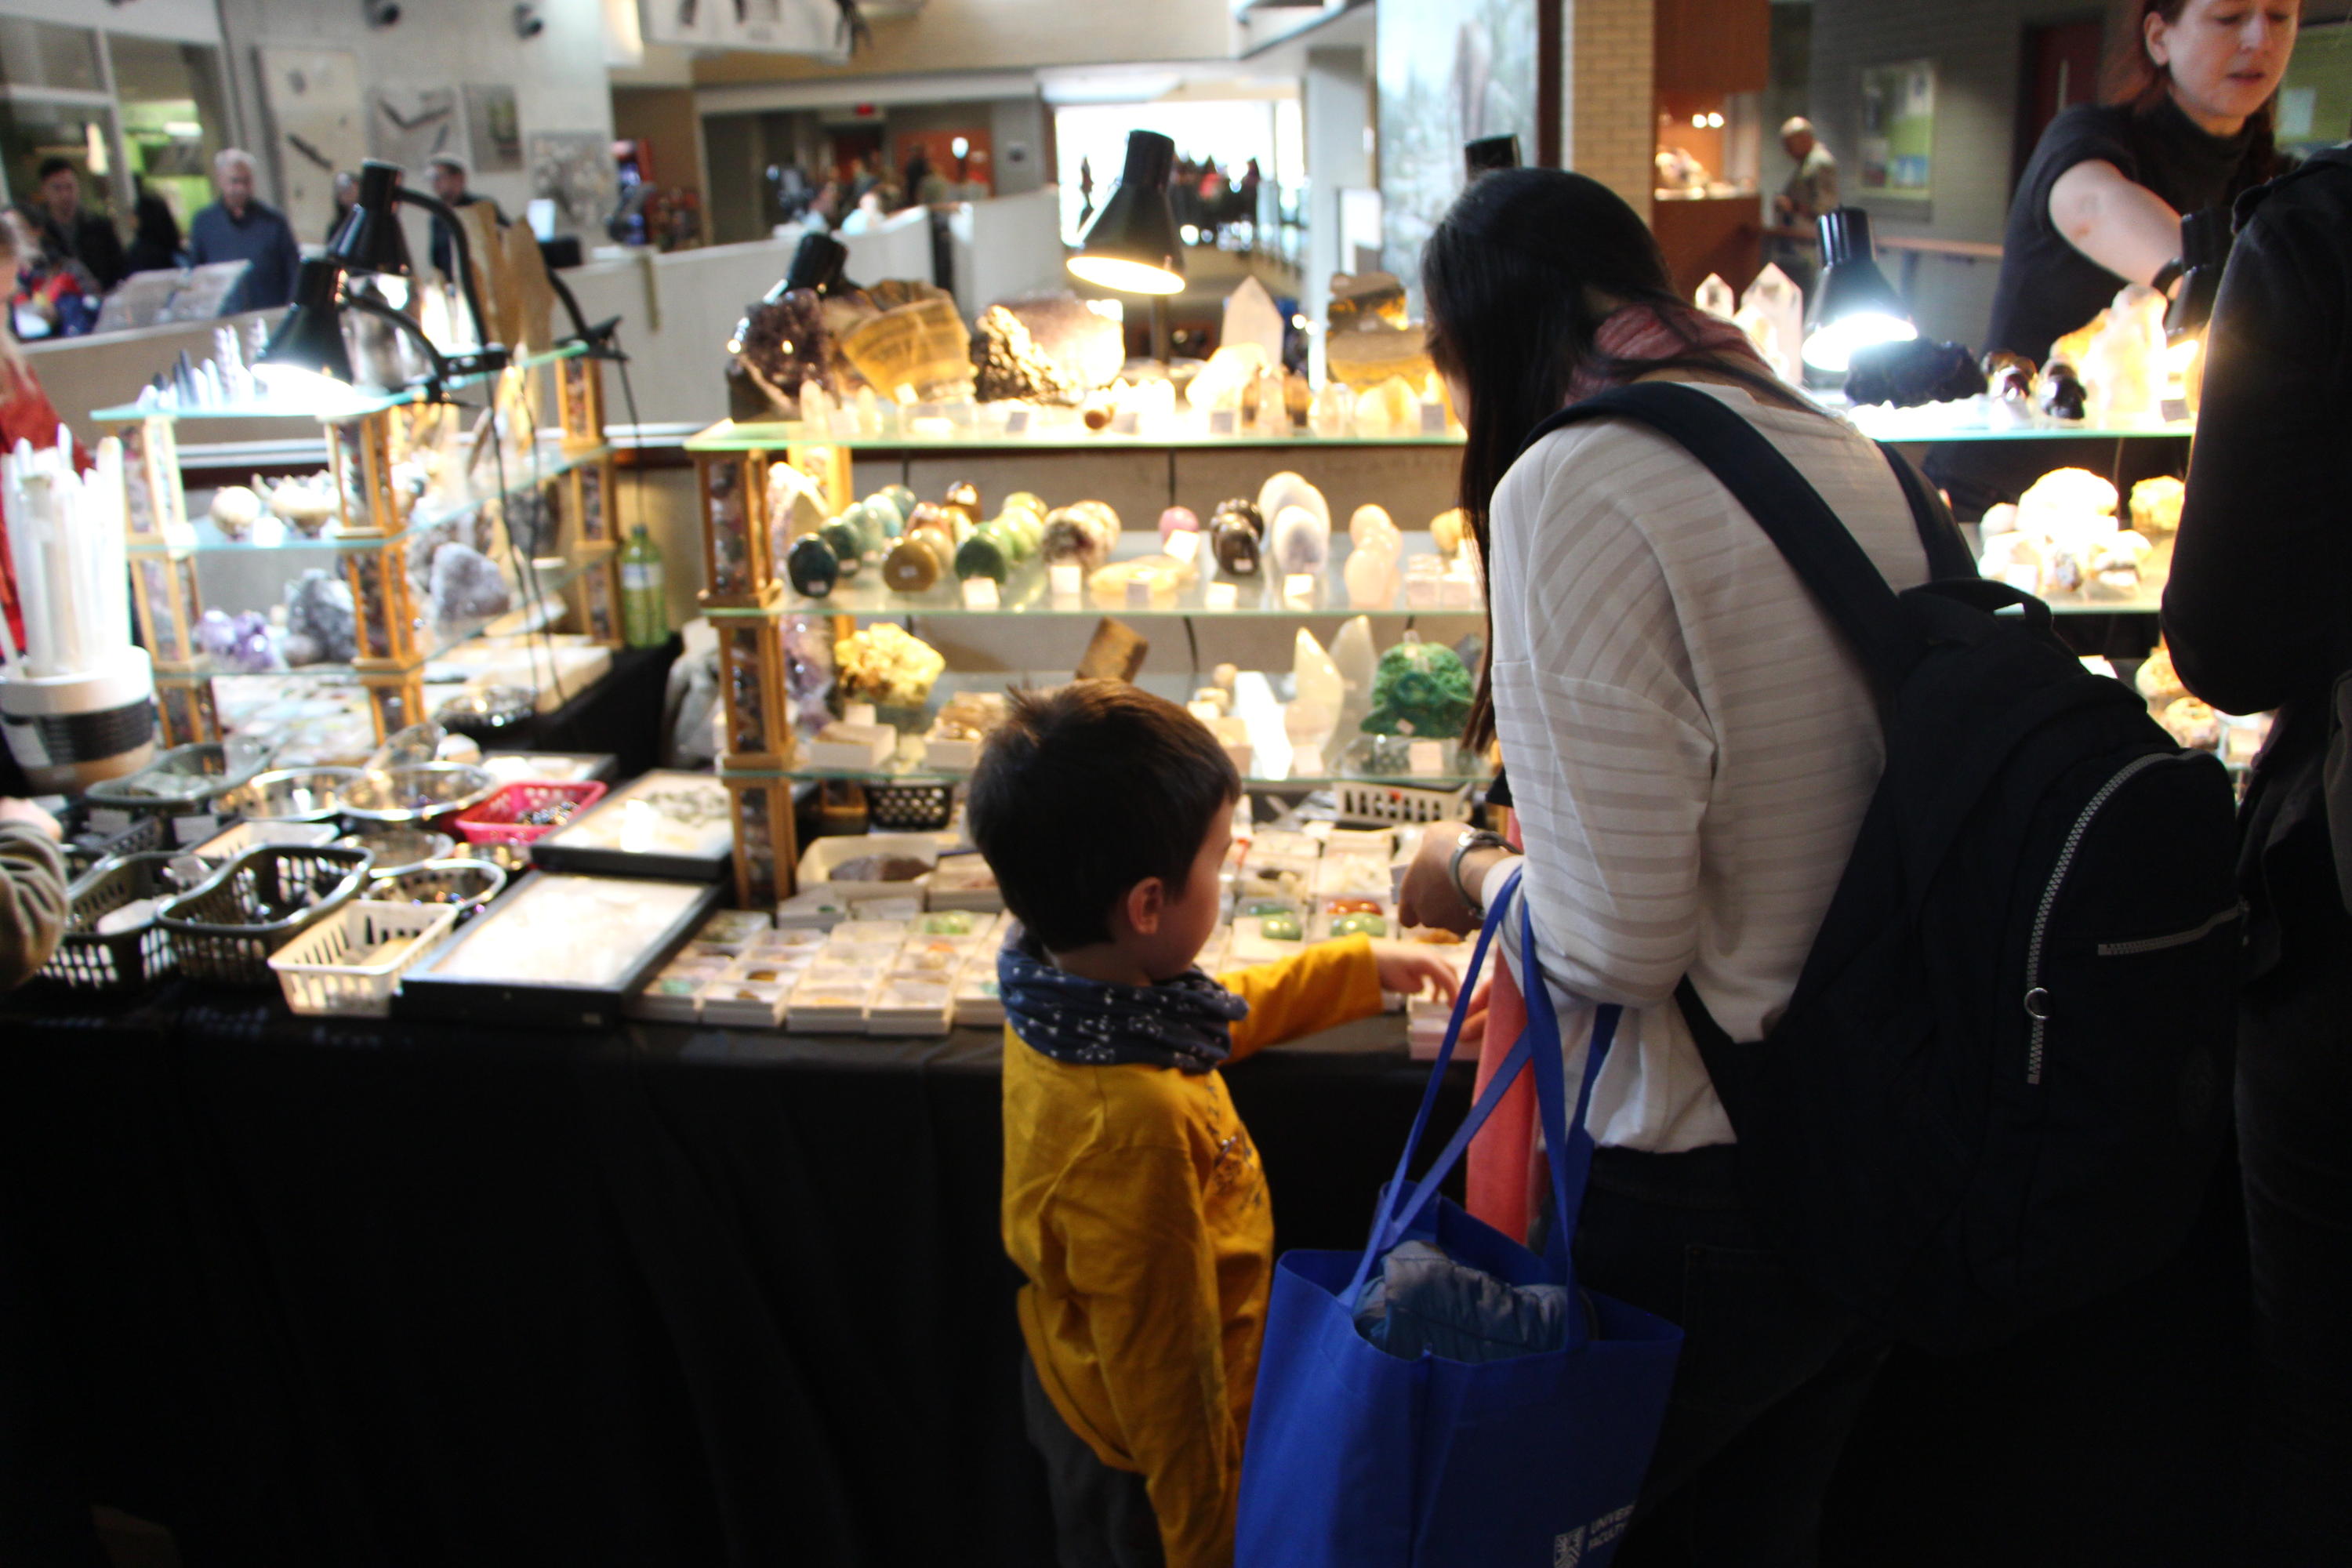 Child and parent looking at minerals at the Gem and Mineral Show.